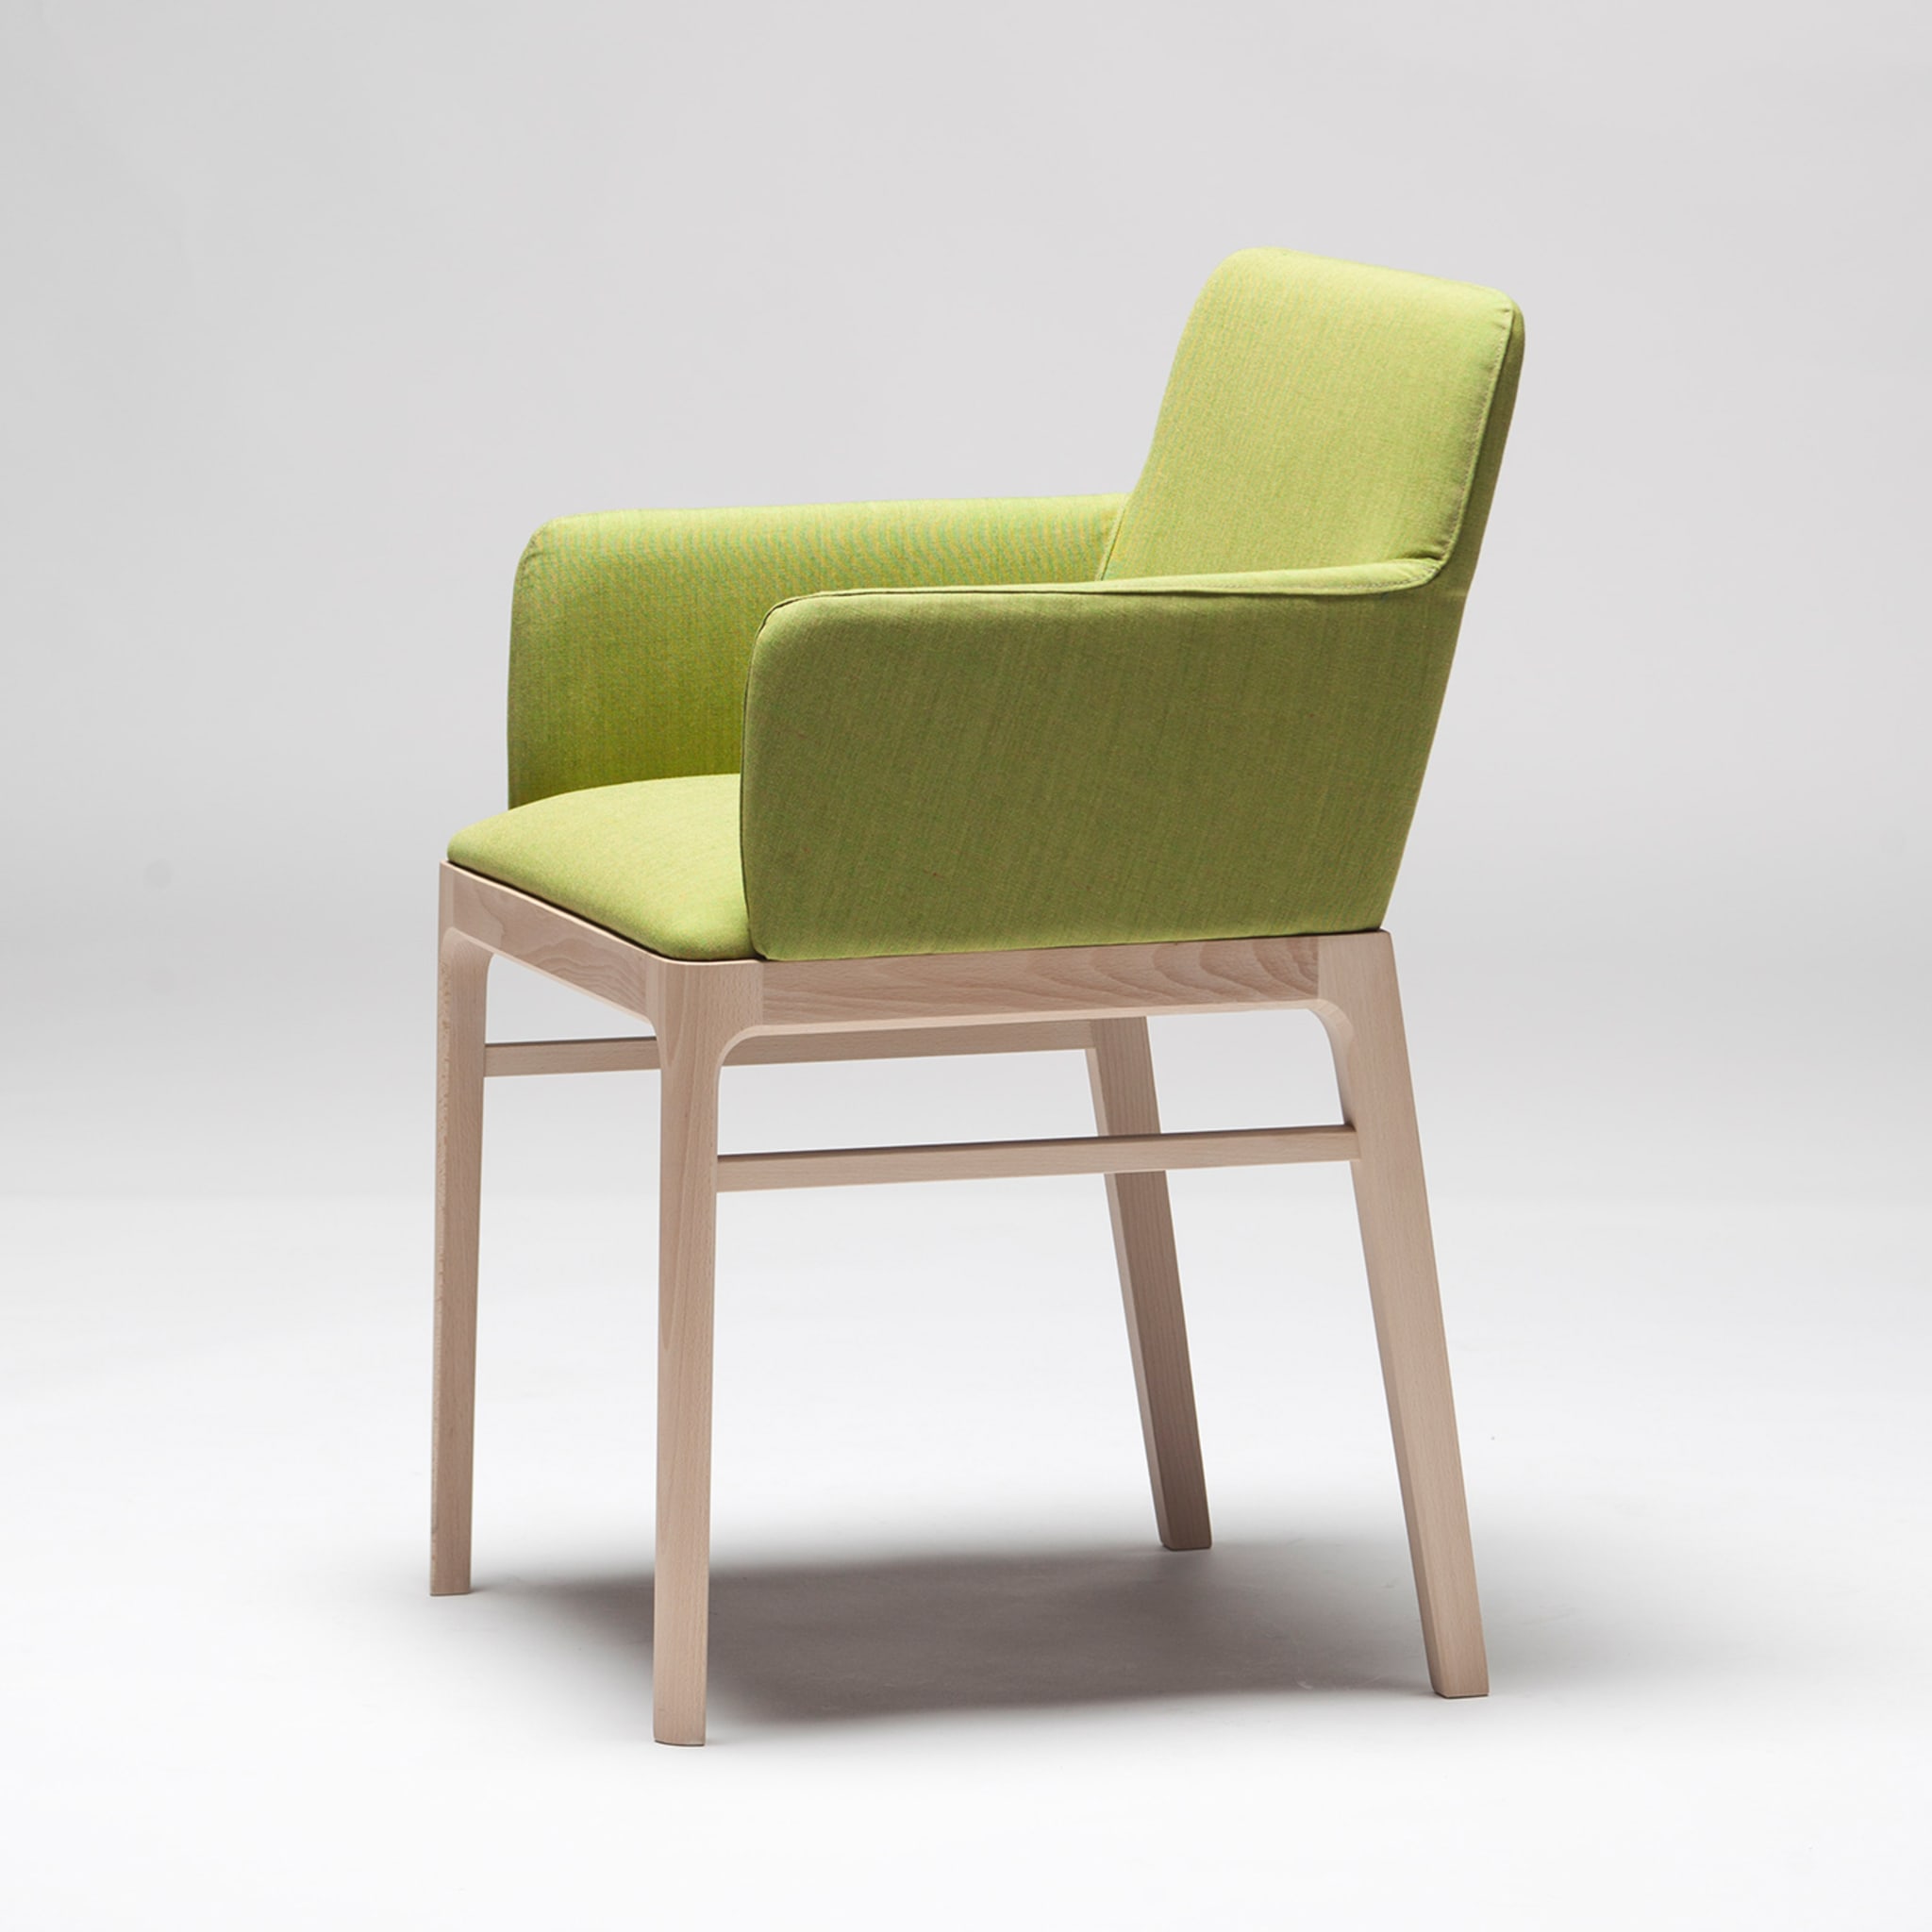 Tip Tap 381 Green Armchair by Claudio Perin - Alternative view 3